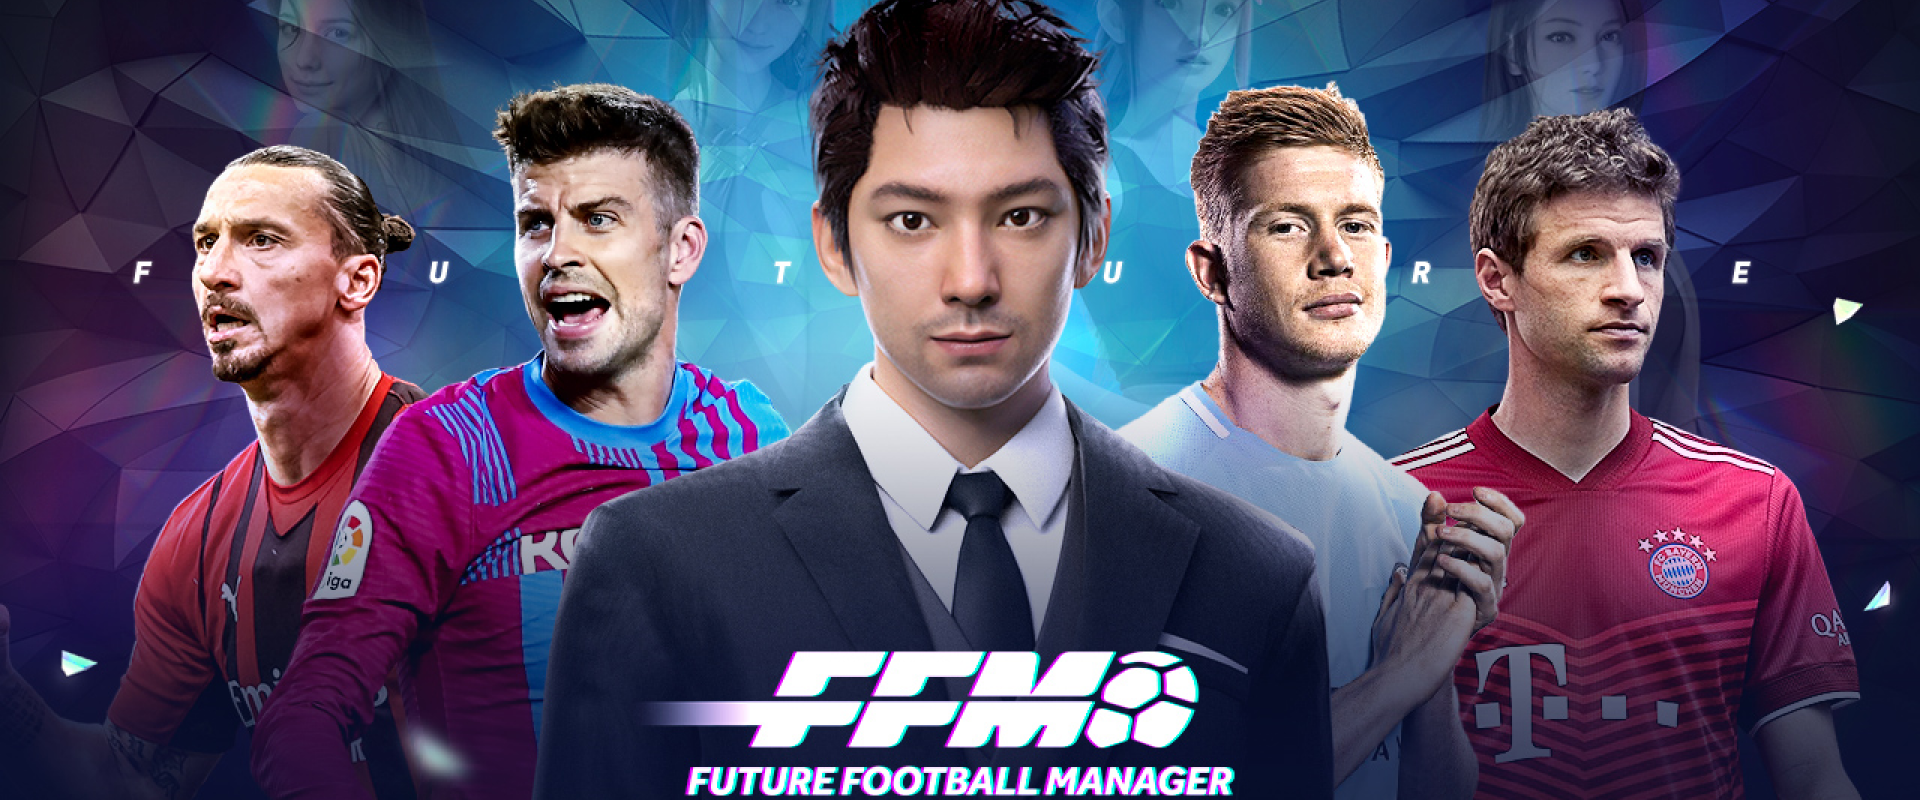 Download & Play Football Manager 2022 Mobile on PC & Mac